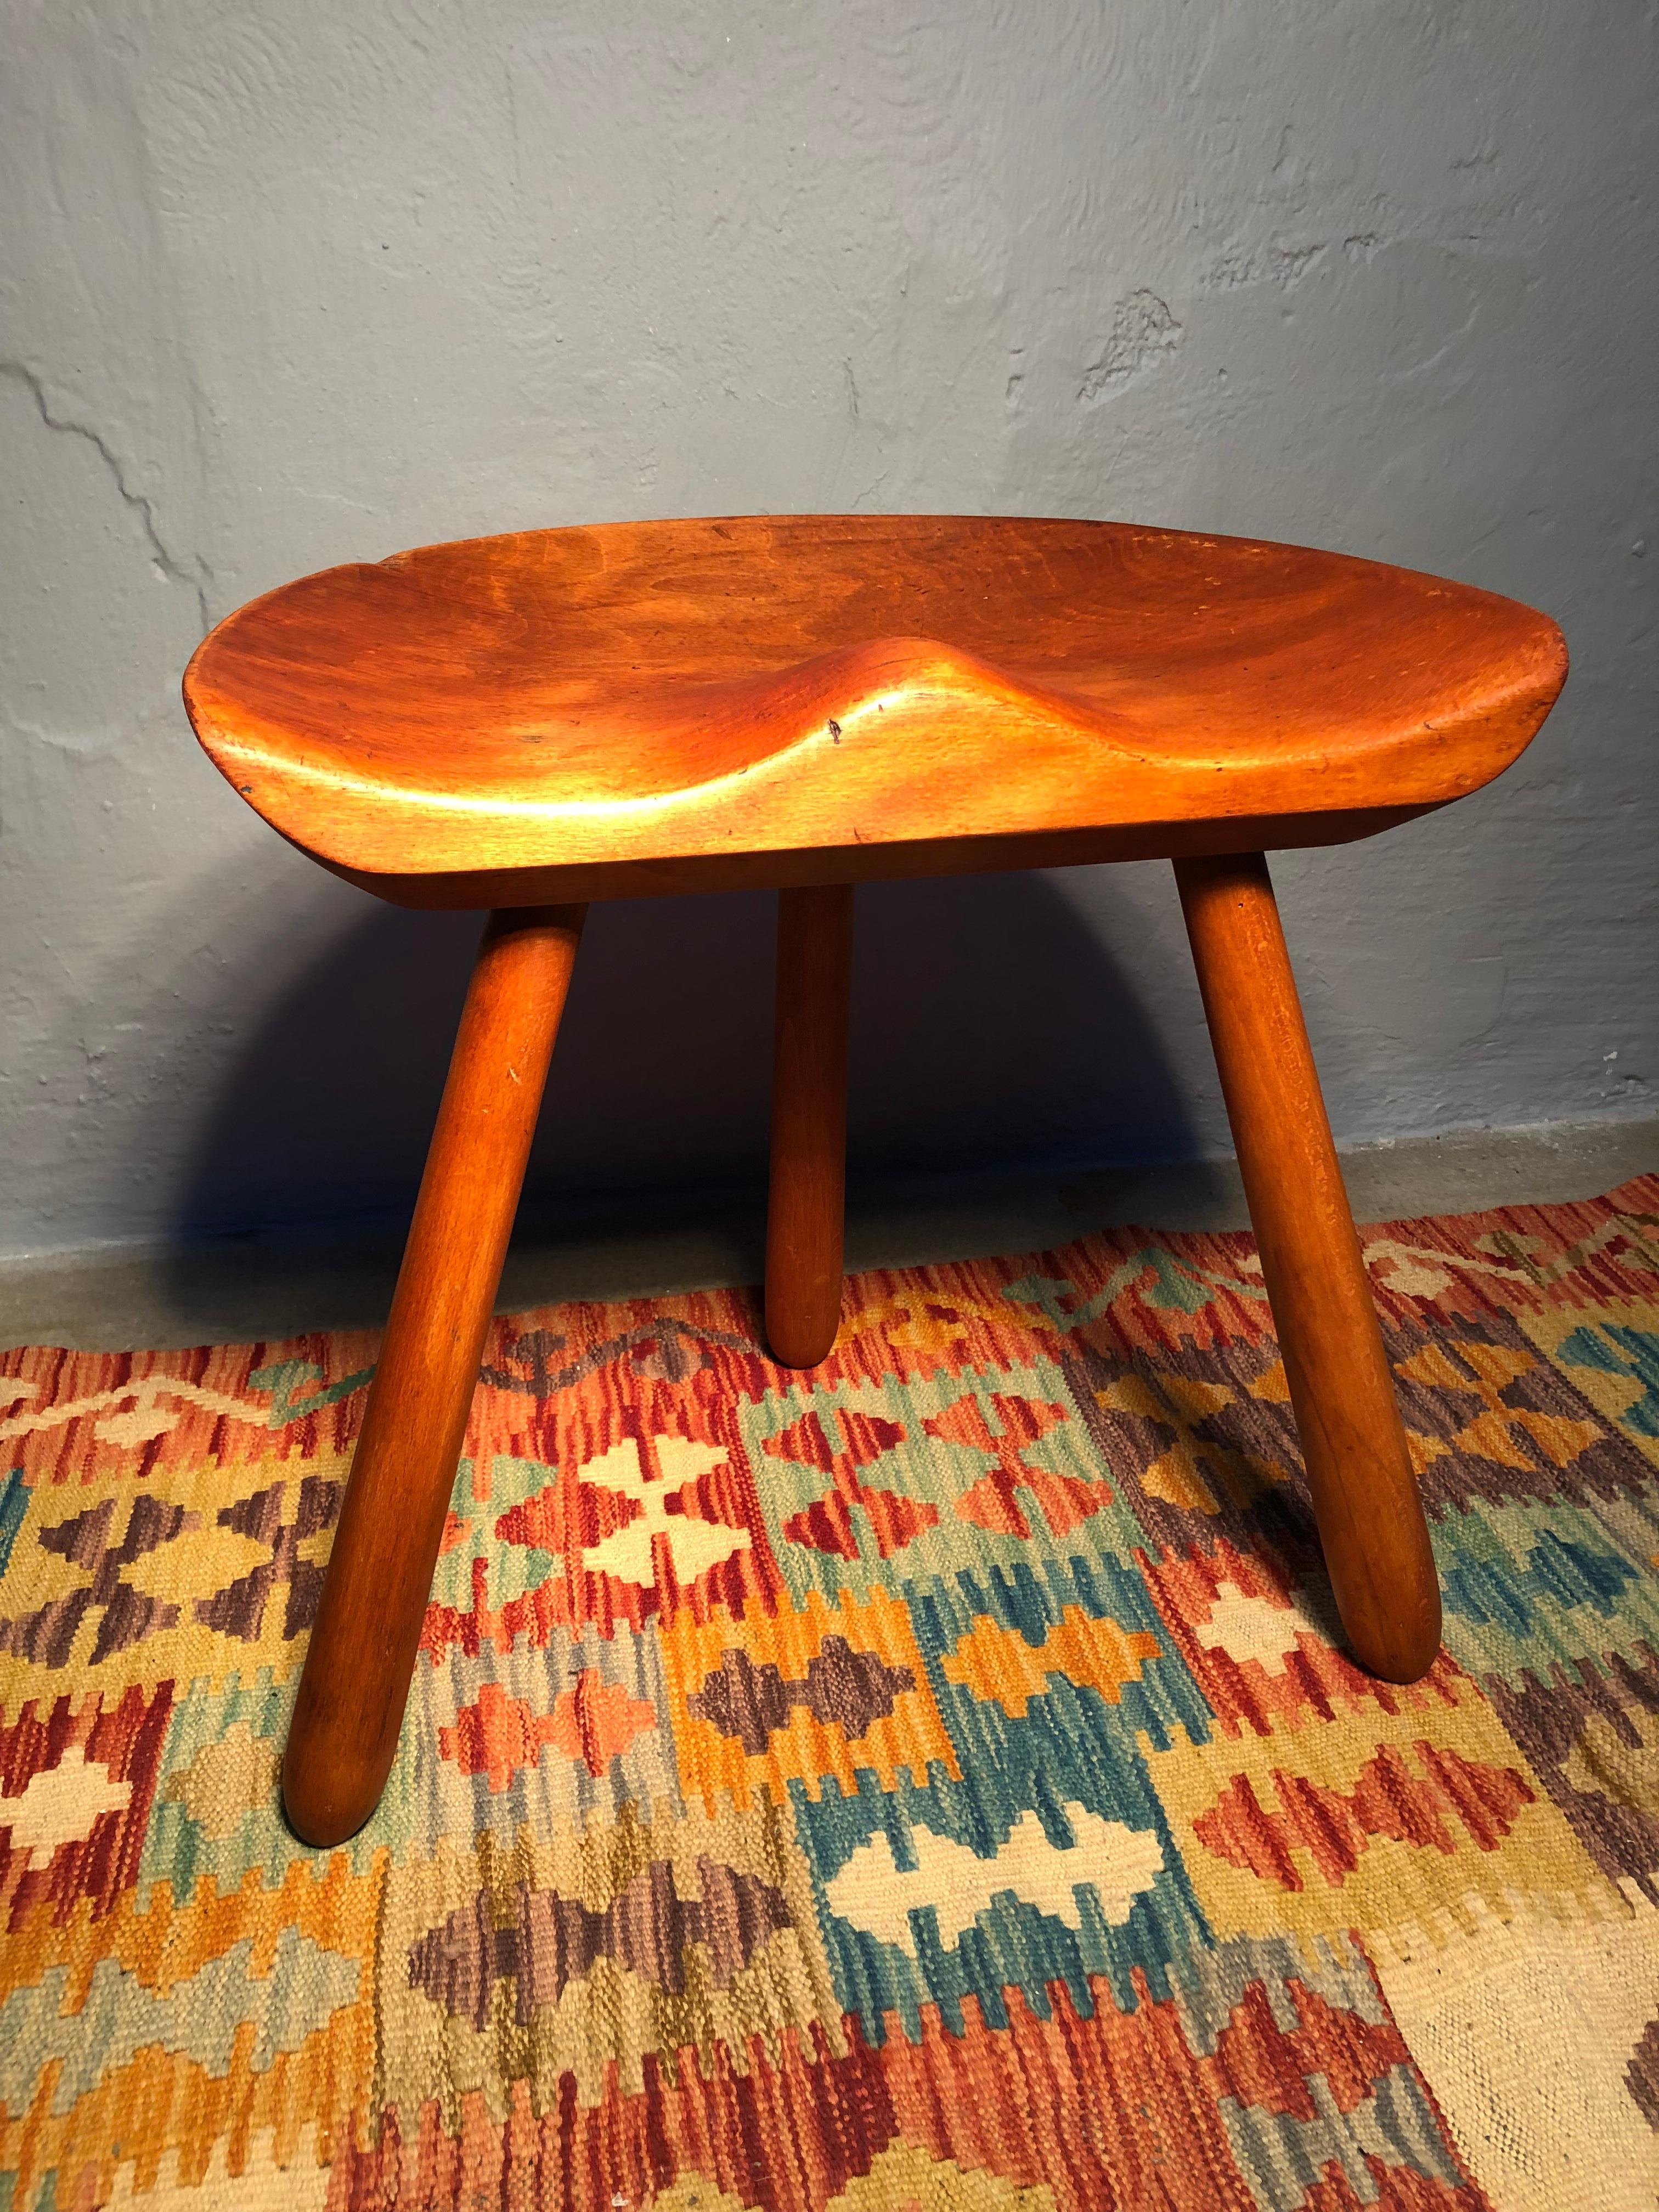 A mid Century milking Stool in beech wood. 
With a sculptural and simplistic Scandinavian design and with a carved seat and turned legs. 
The stool has been sanded and waxed. 
With age related wear and patina from years of use.